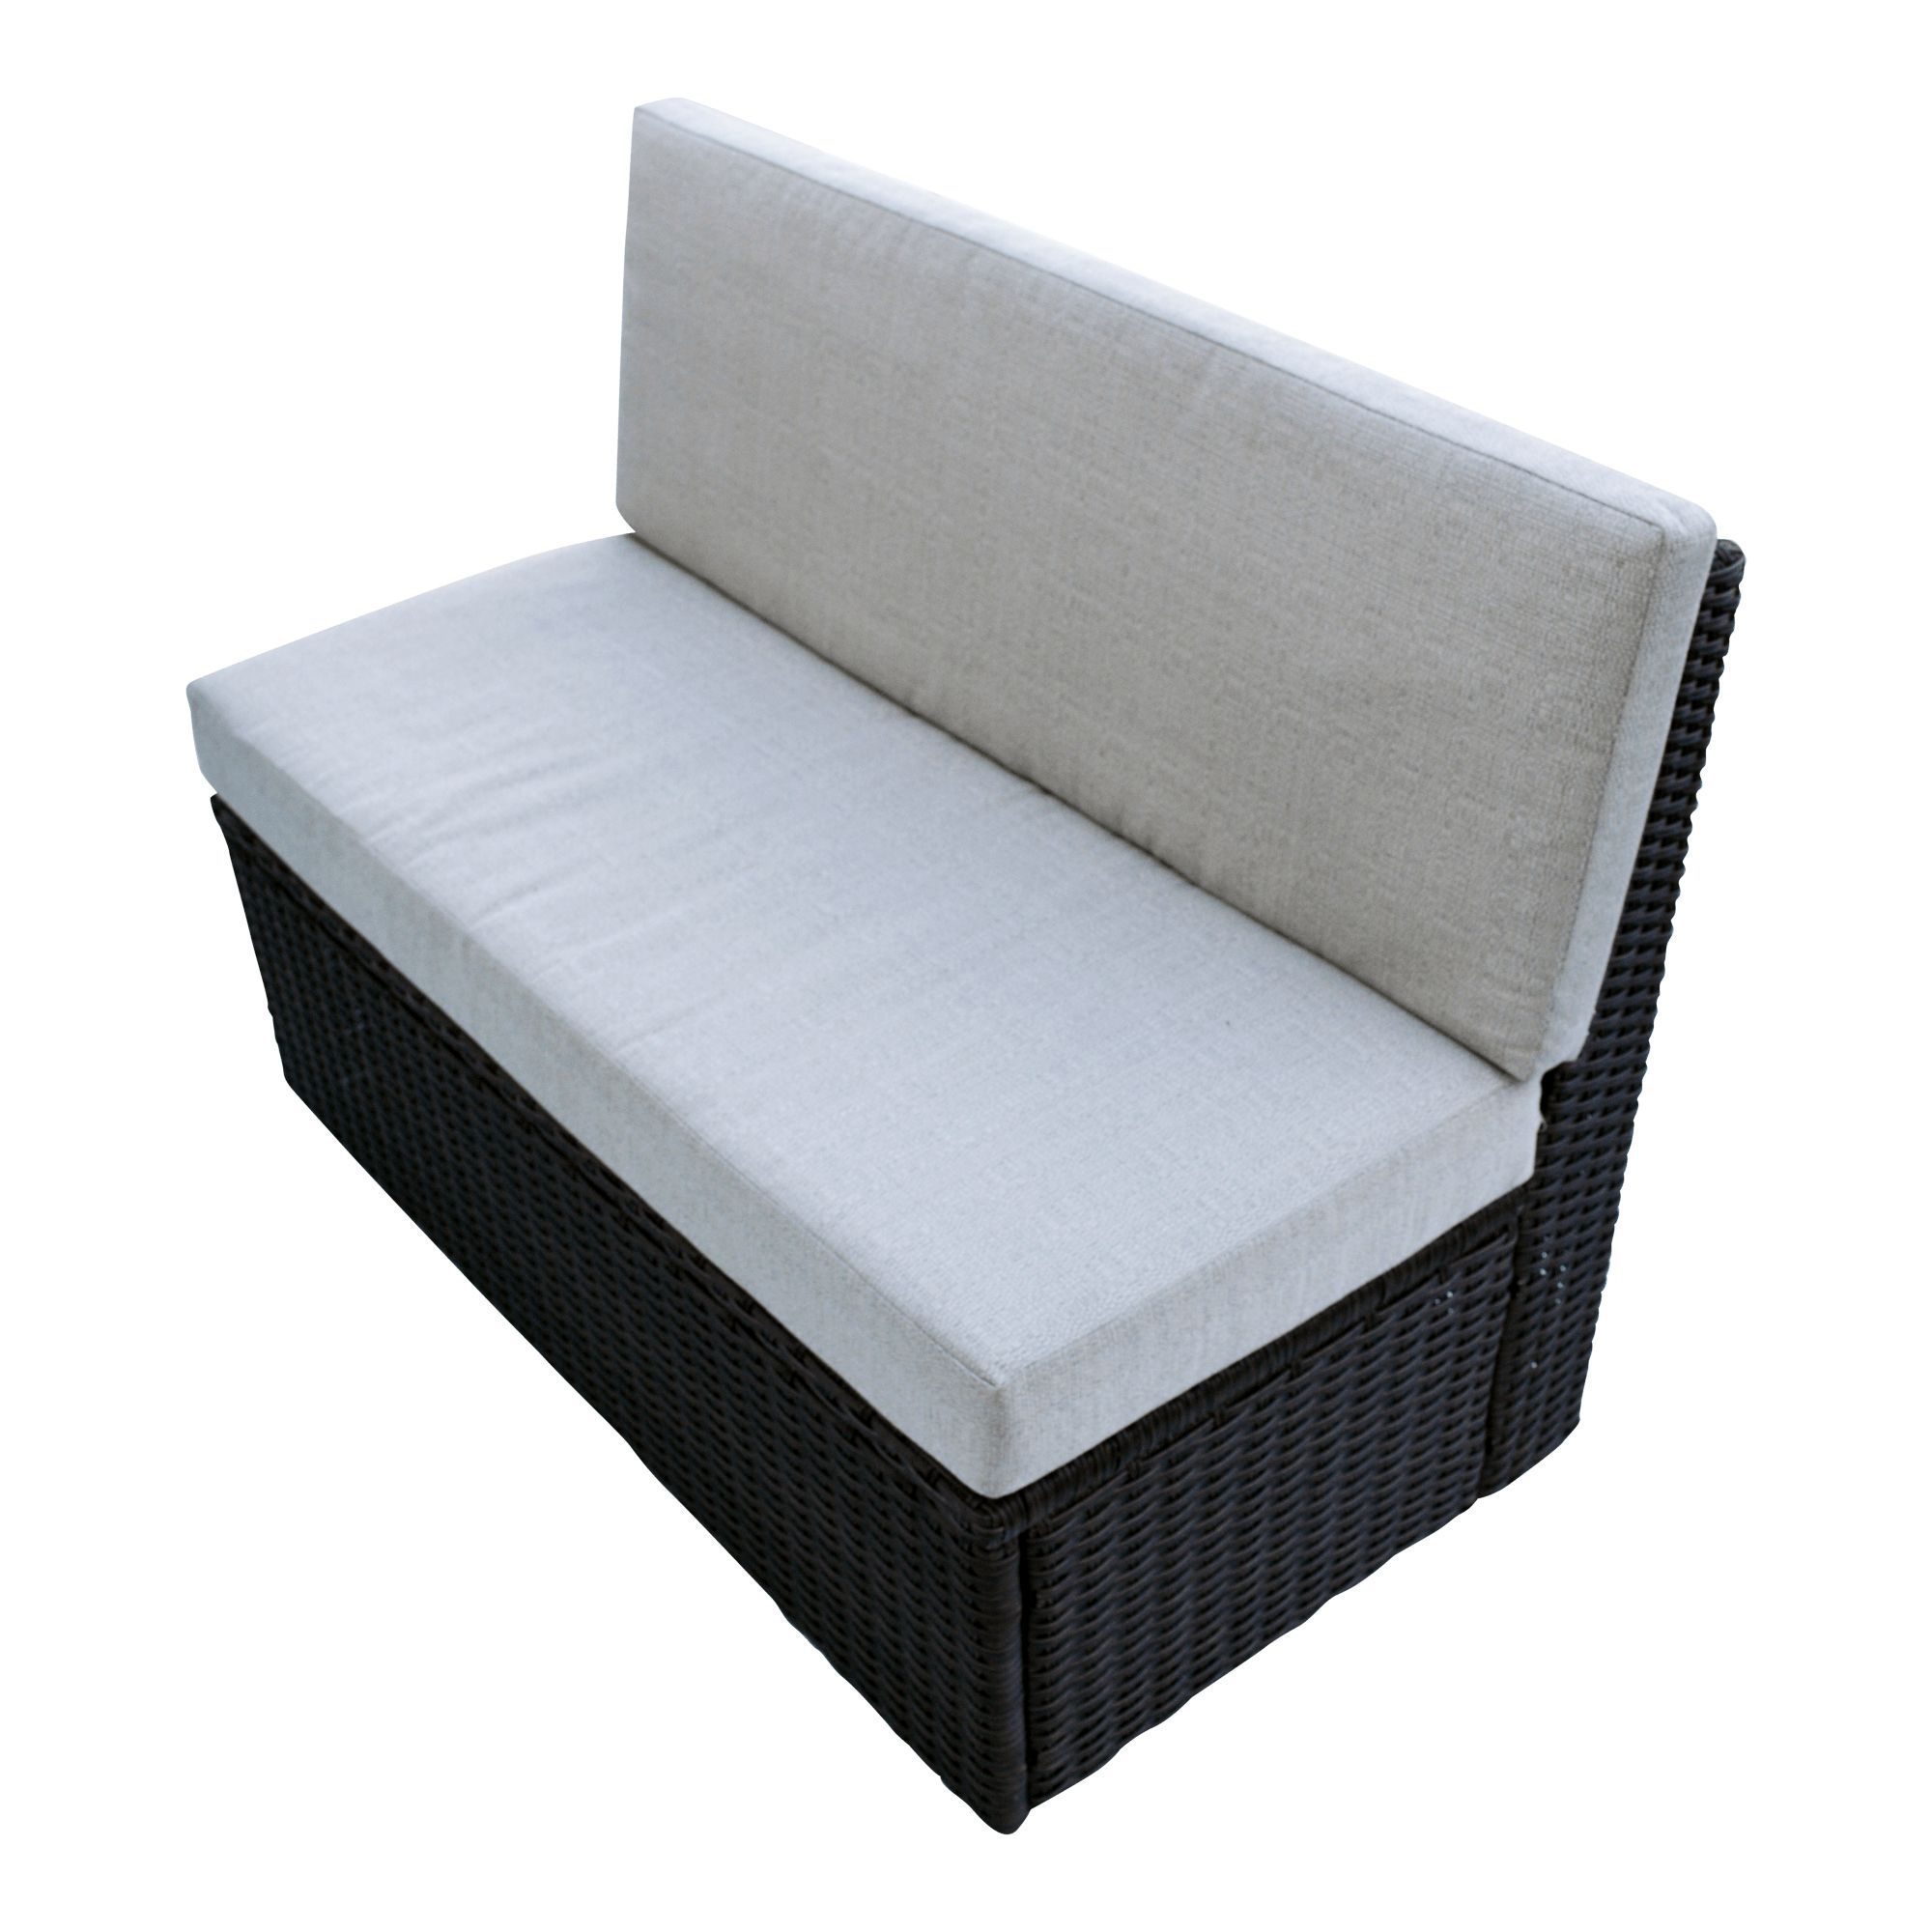 Canadian Spa Company Brown Loveseat